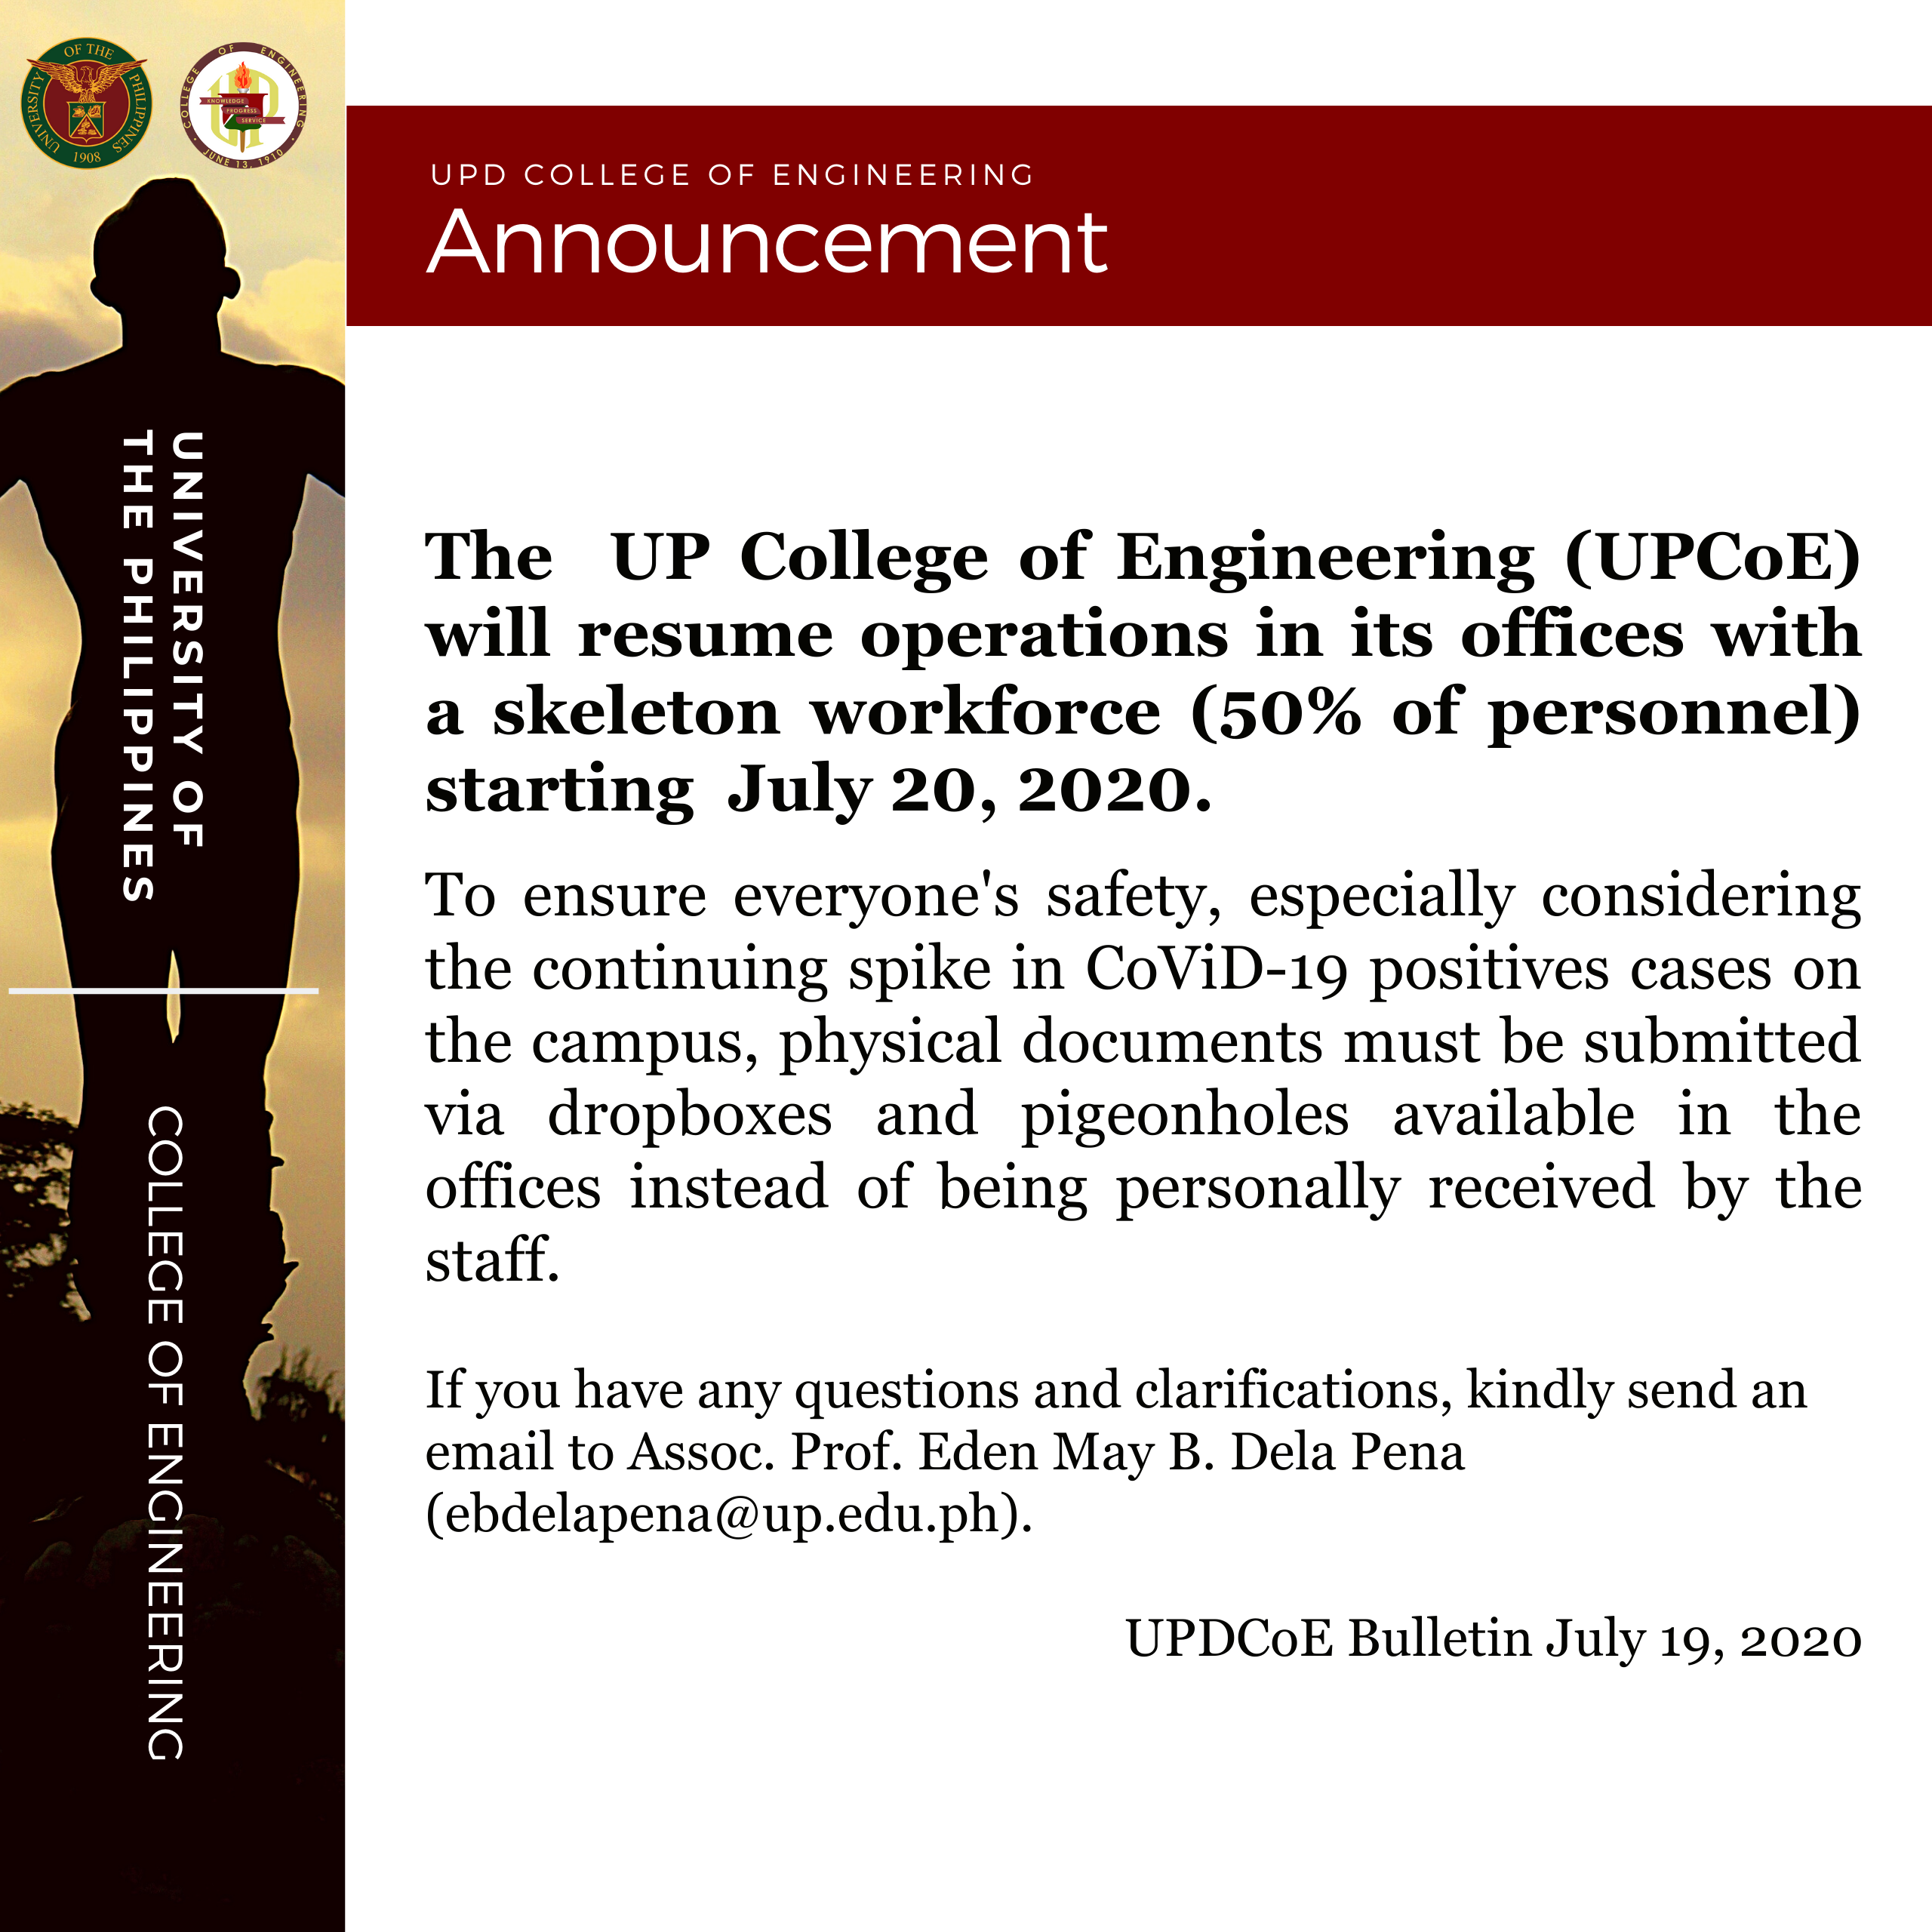 Announcement – UPD CoE Bulletin July 19, 2020